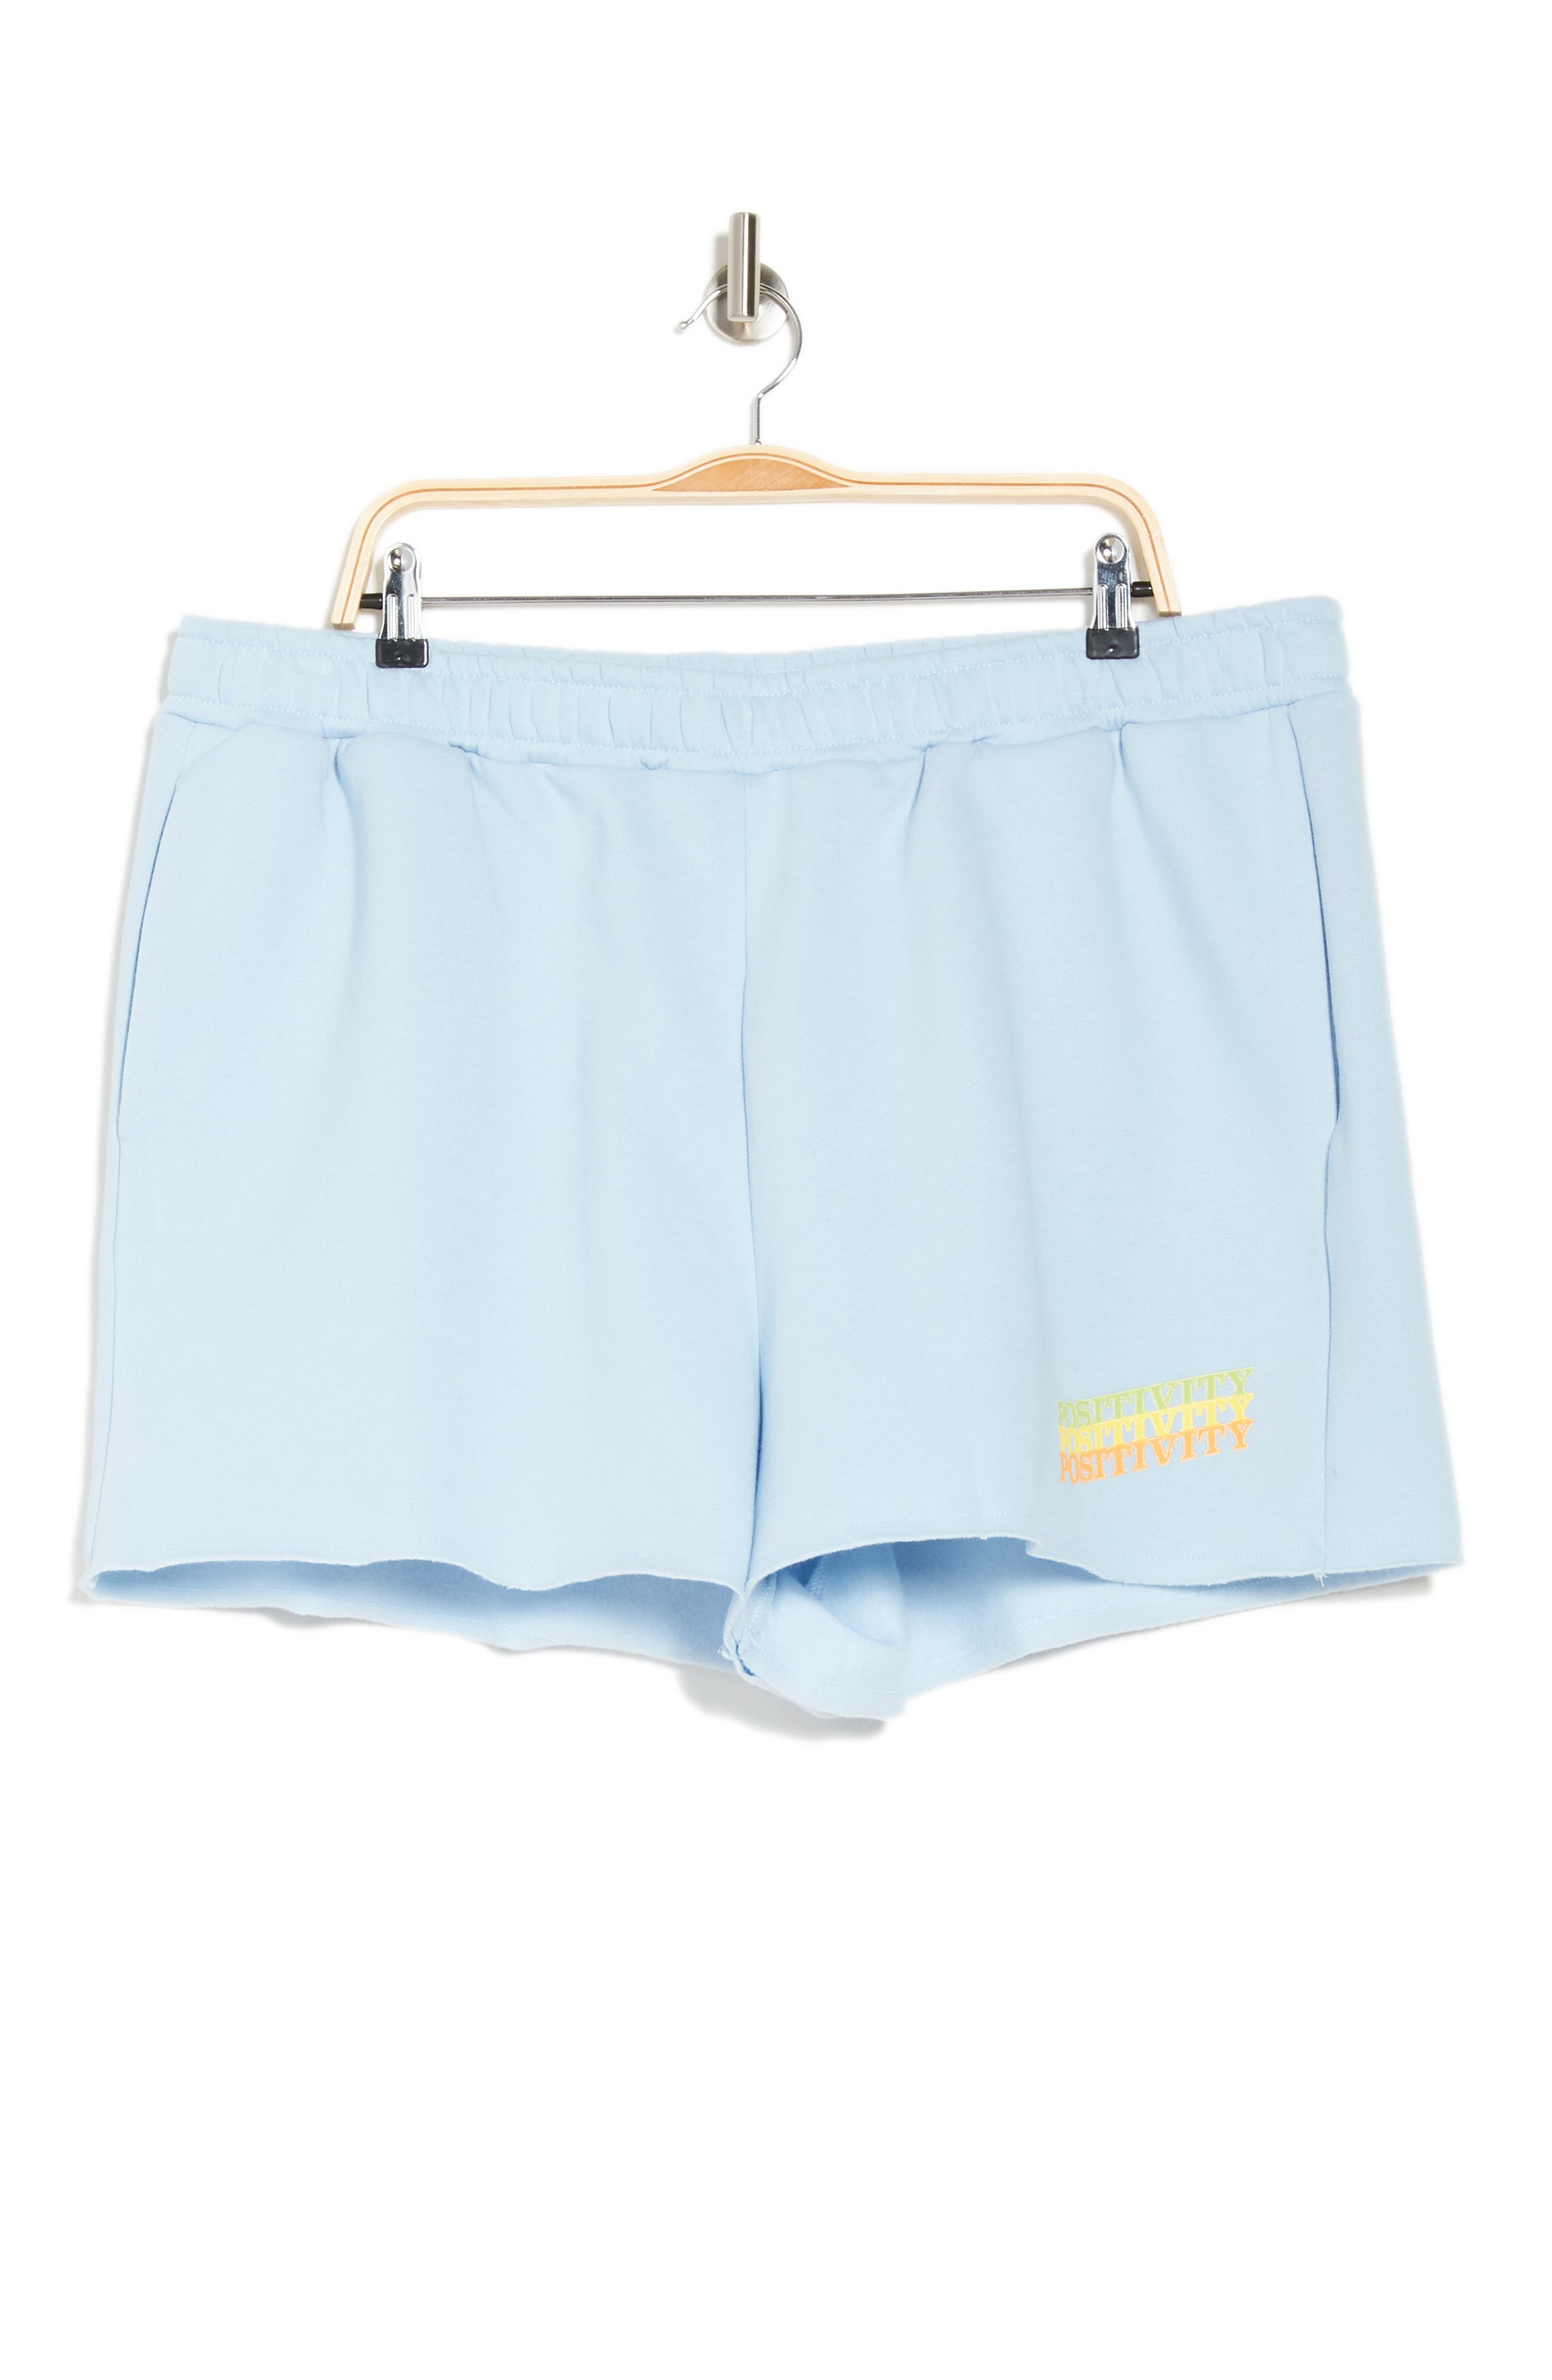 Abound Graphic Print Knit Shorts In Blue Cashmere Positivity